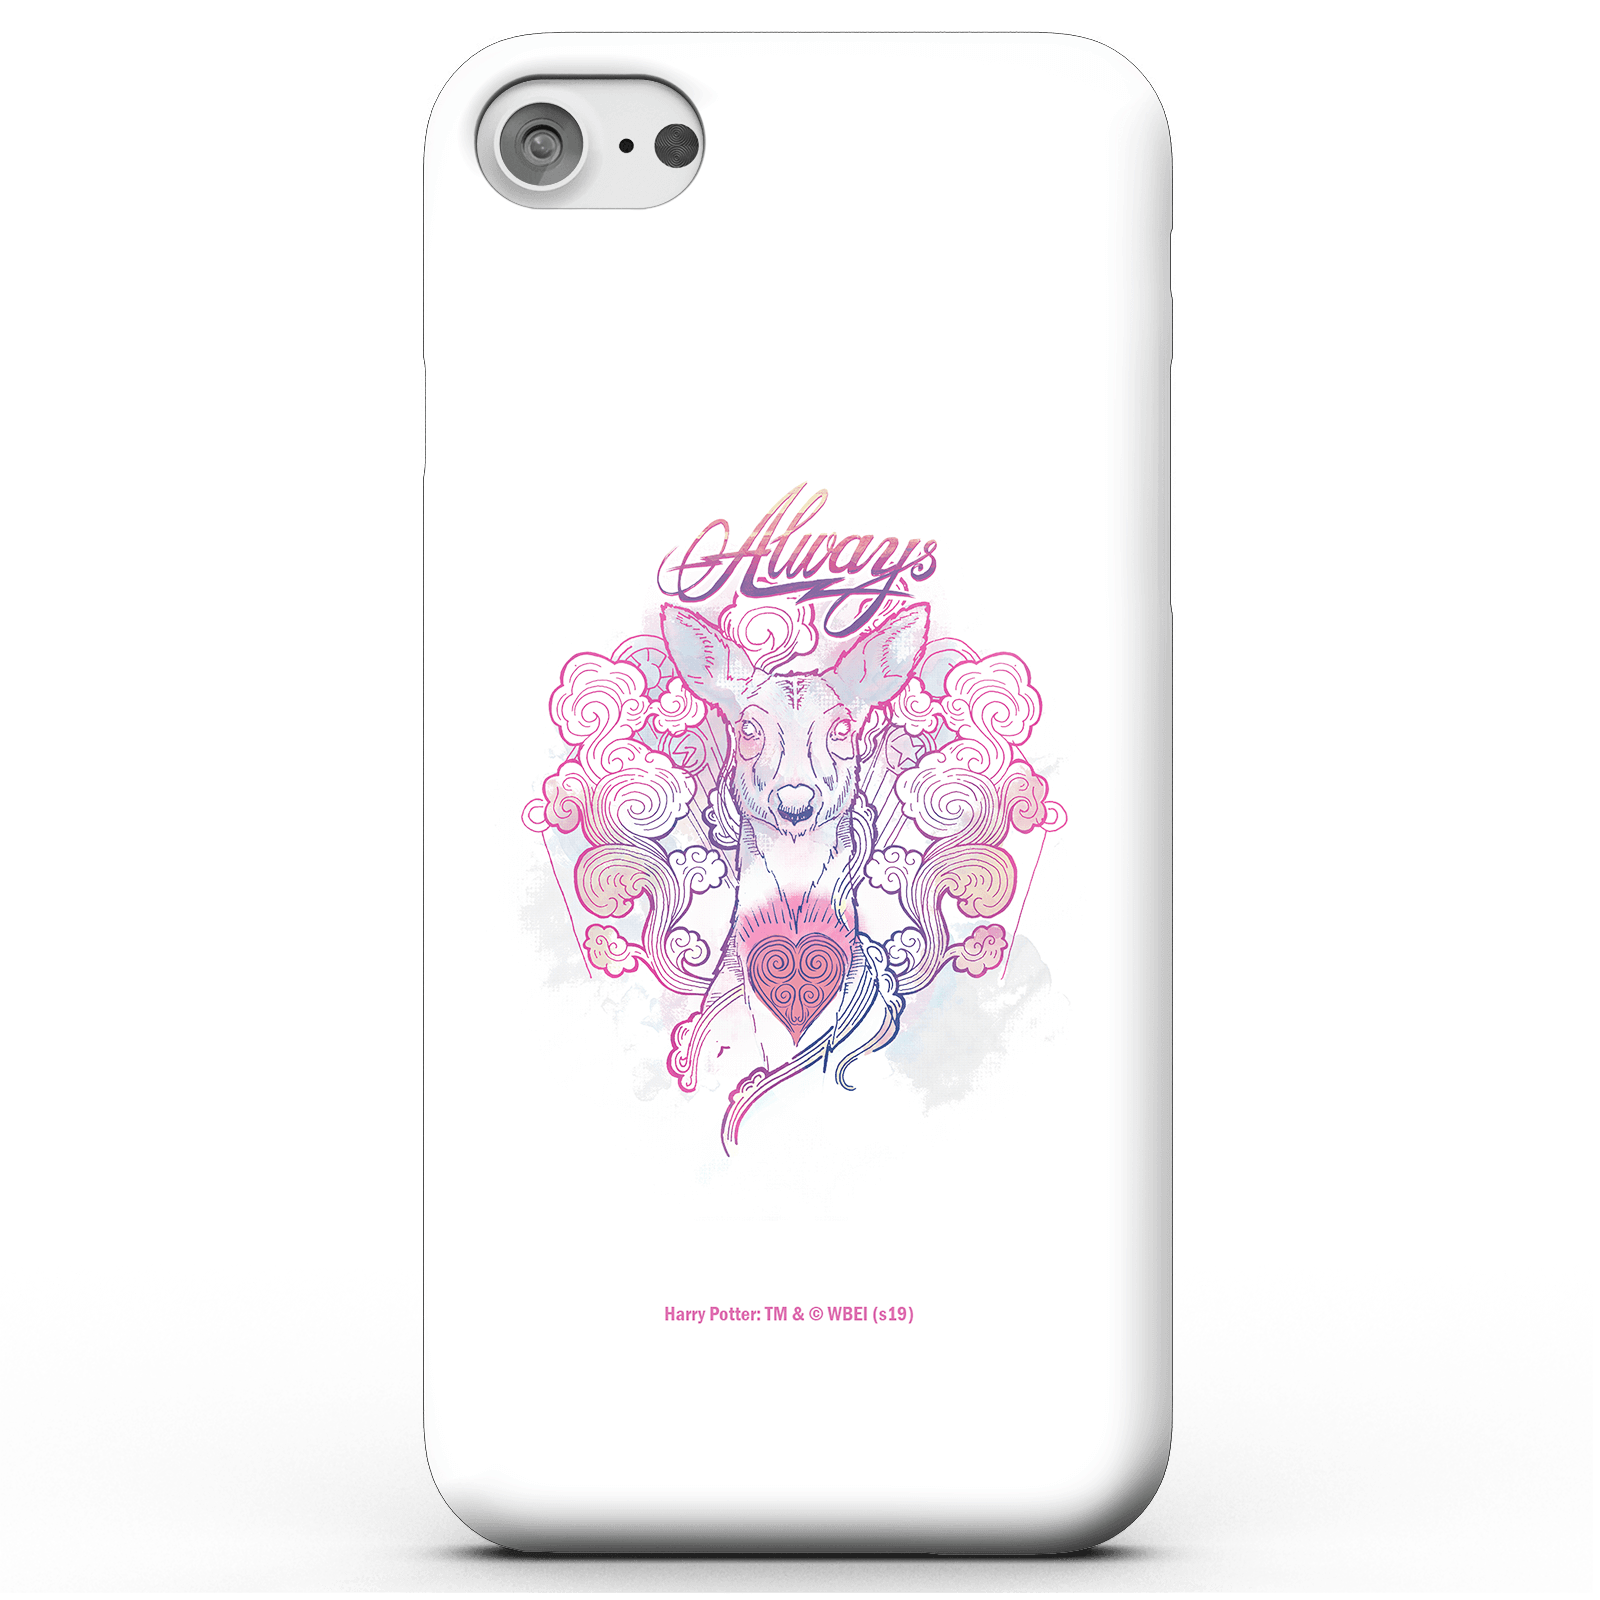 Harry Potter Always Phone Case for iPhone and Android - iPhone XS - Snap Case - Matte